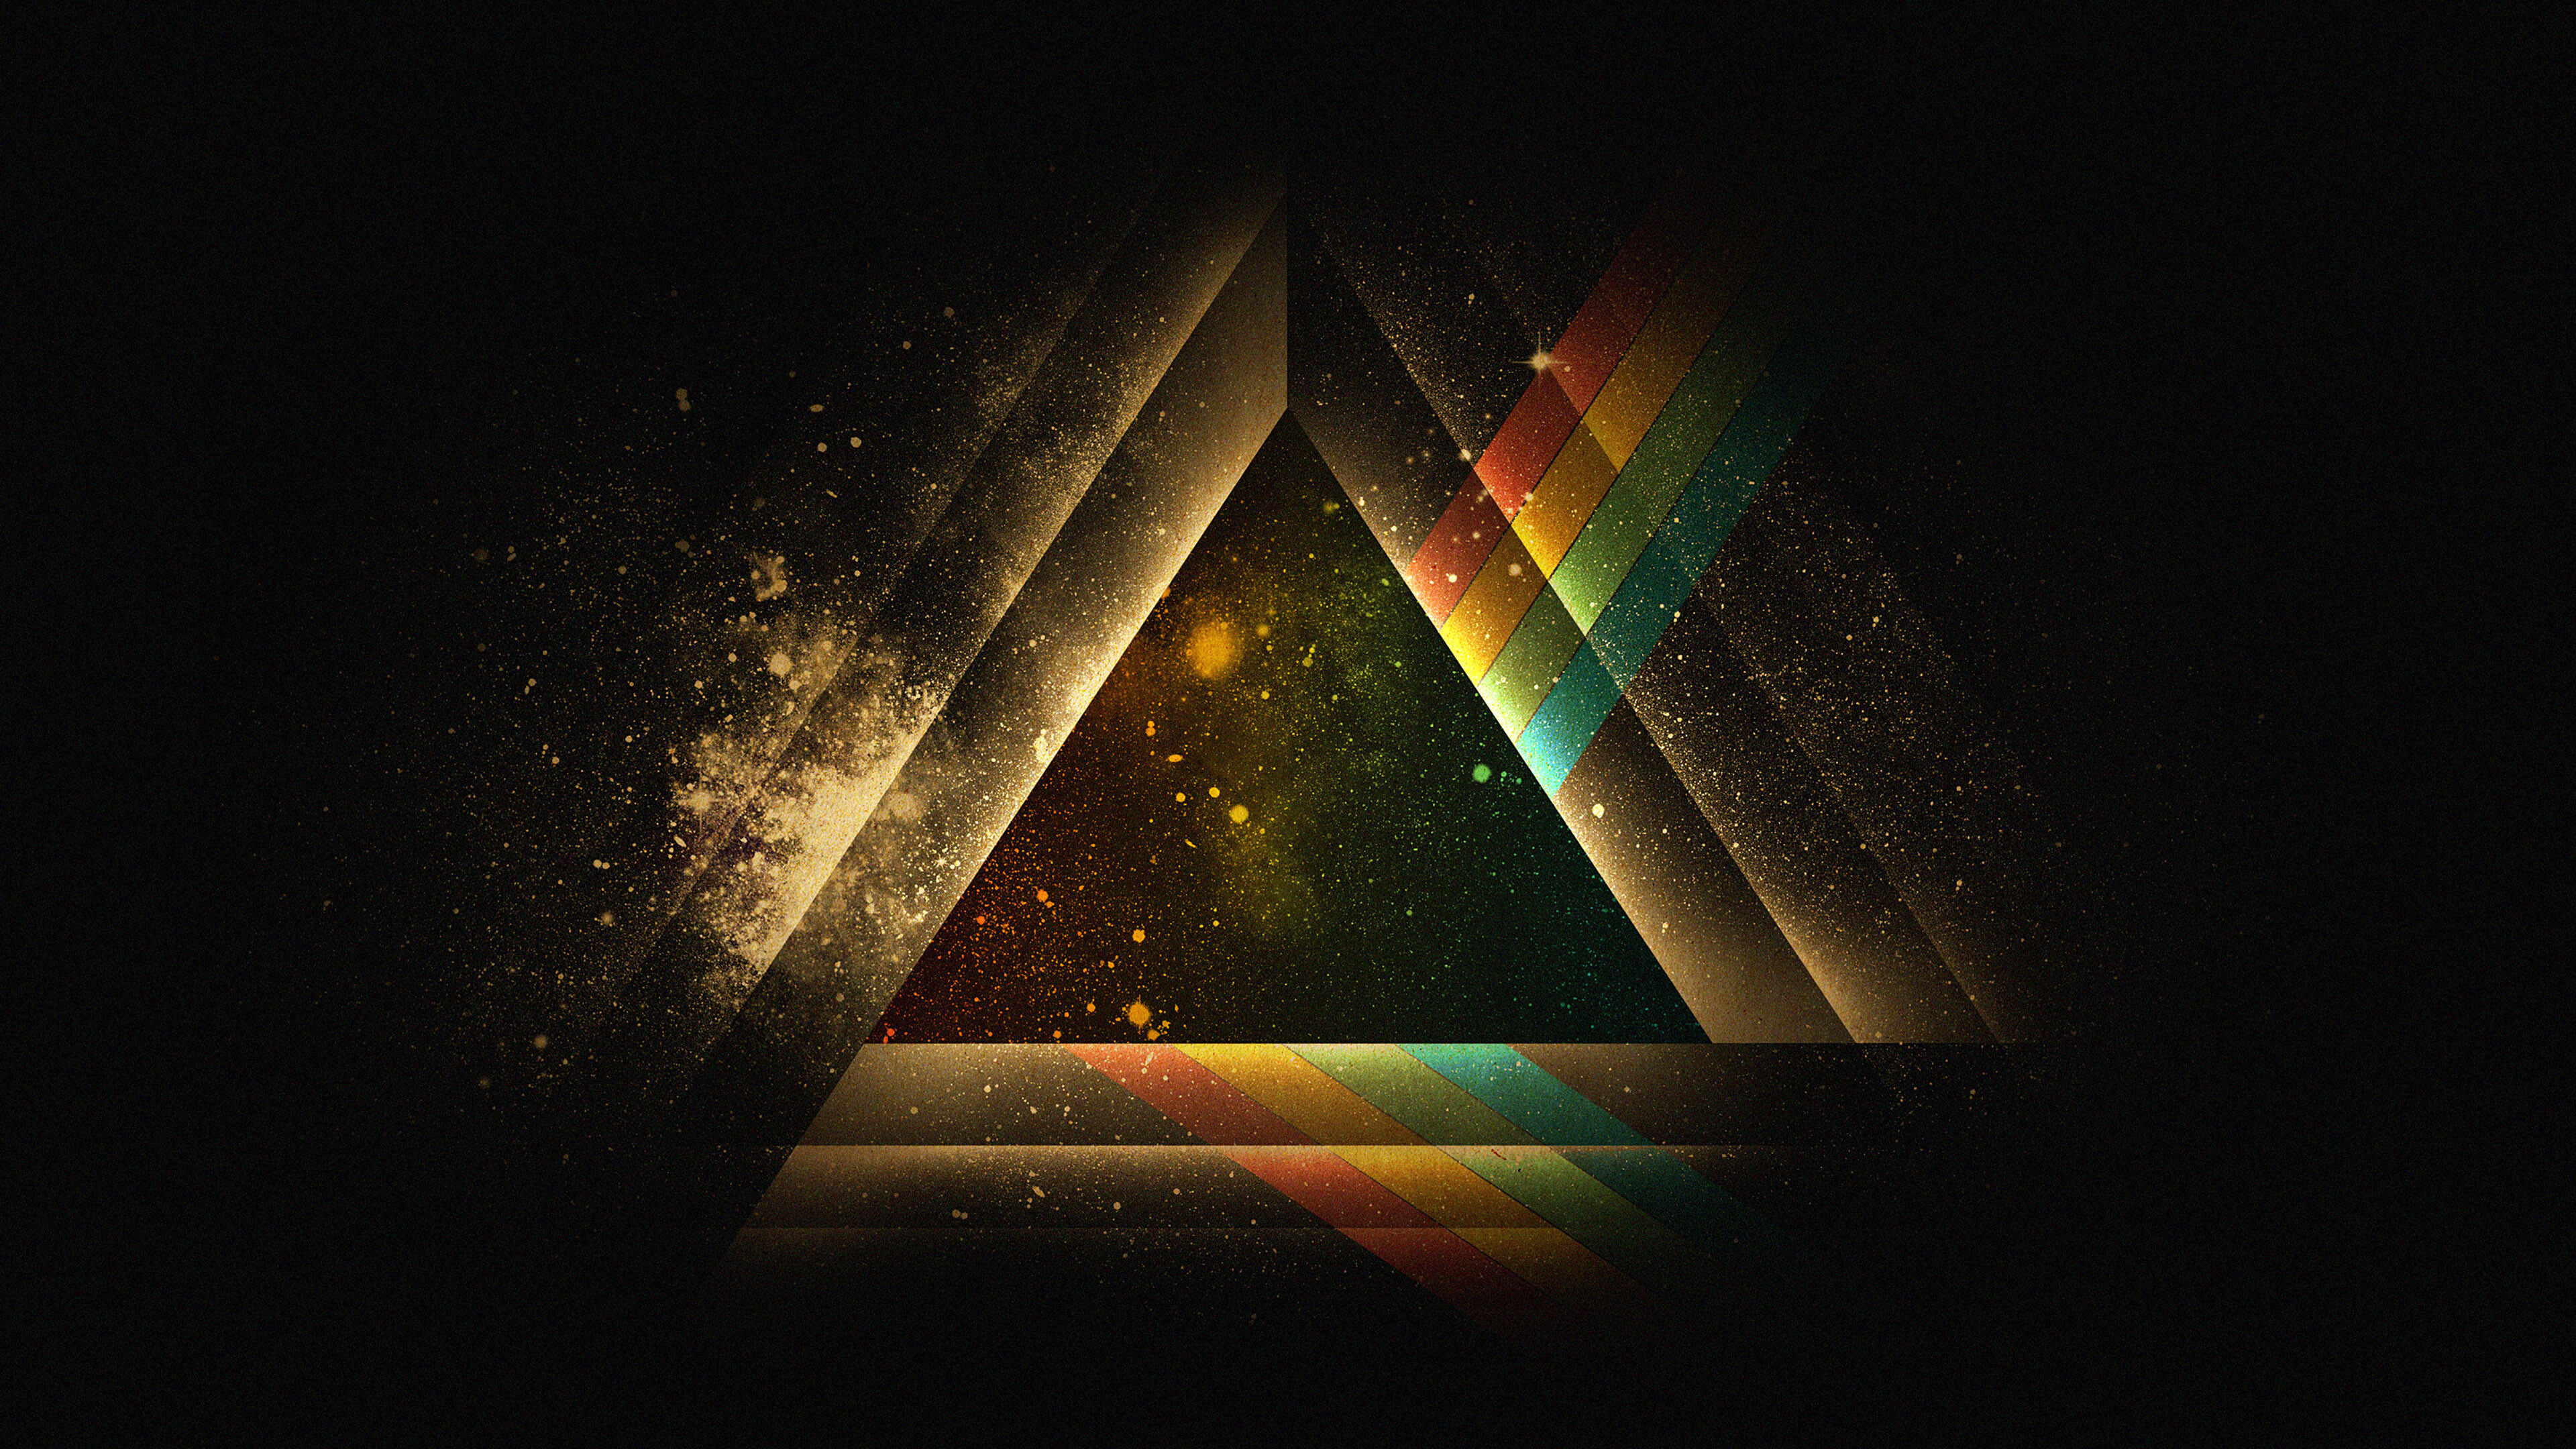 Triangle: Rainbow, Space art, Equilateral figure, Reflections. 3840x2160 4K Wallpaper.